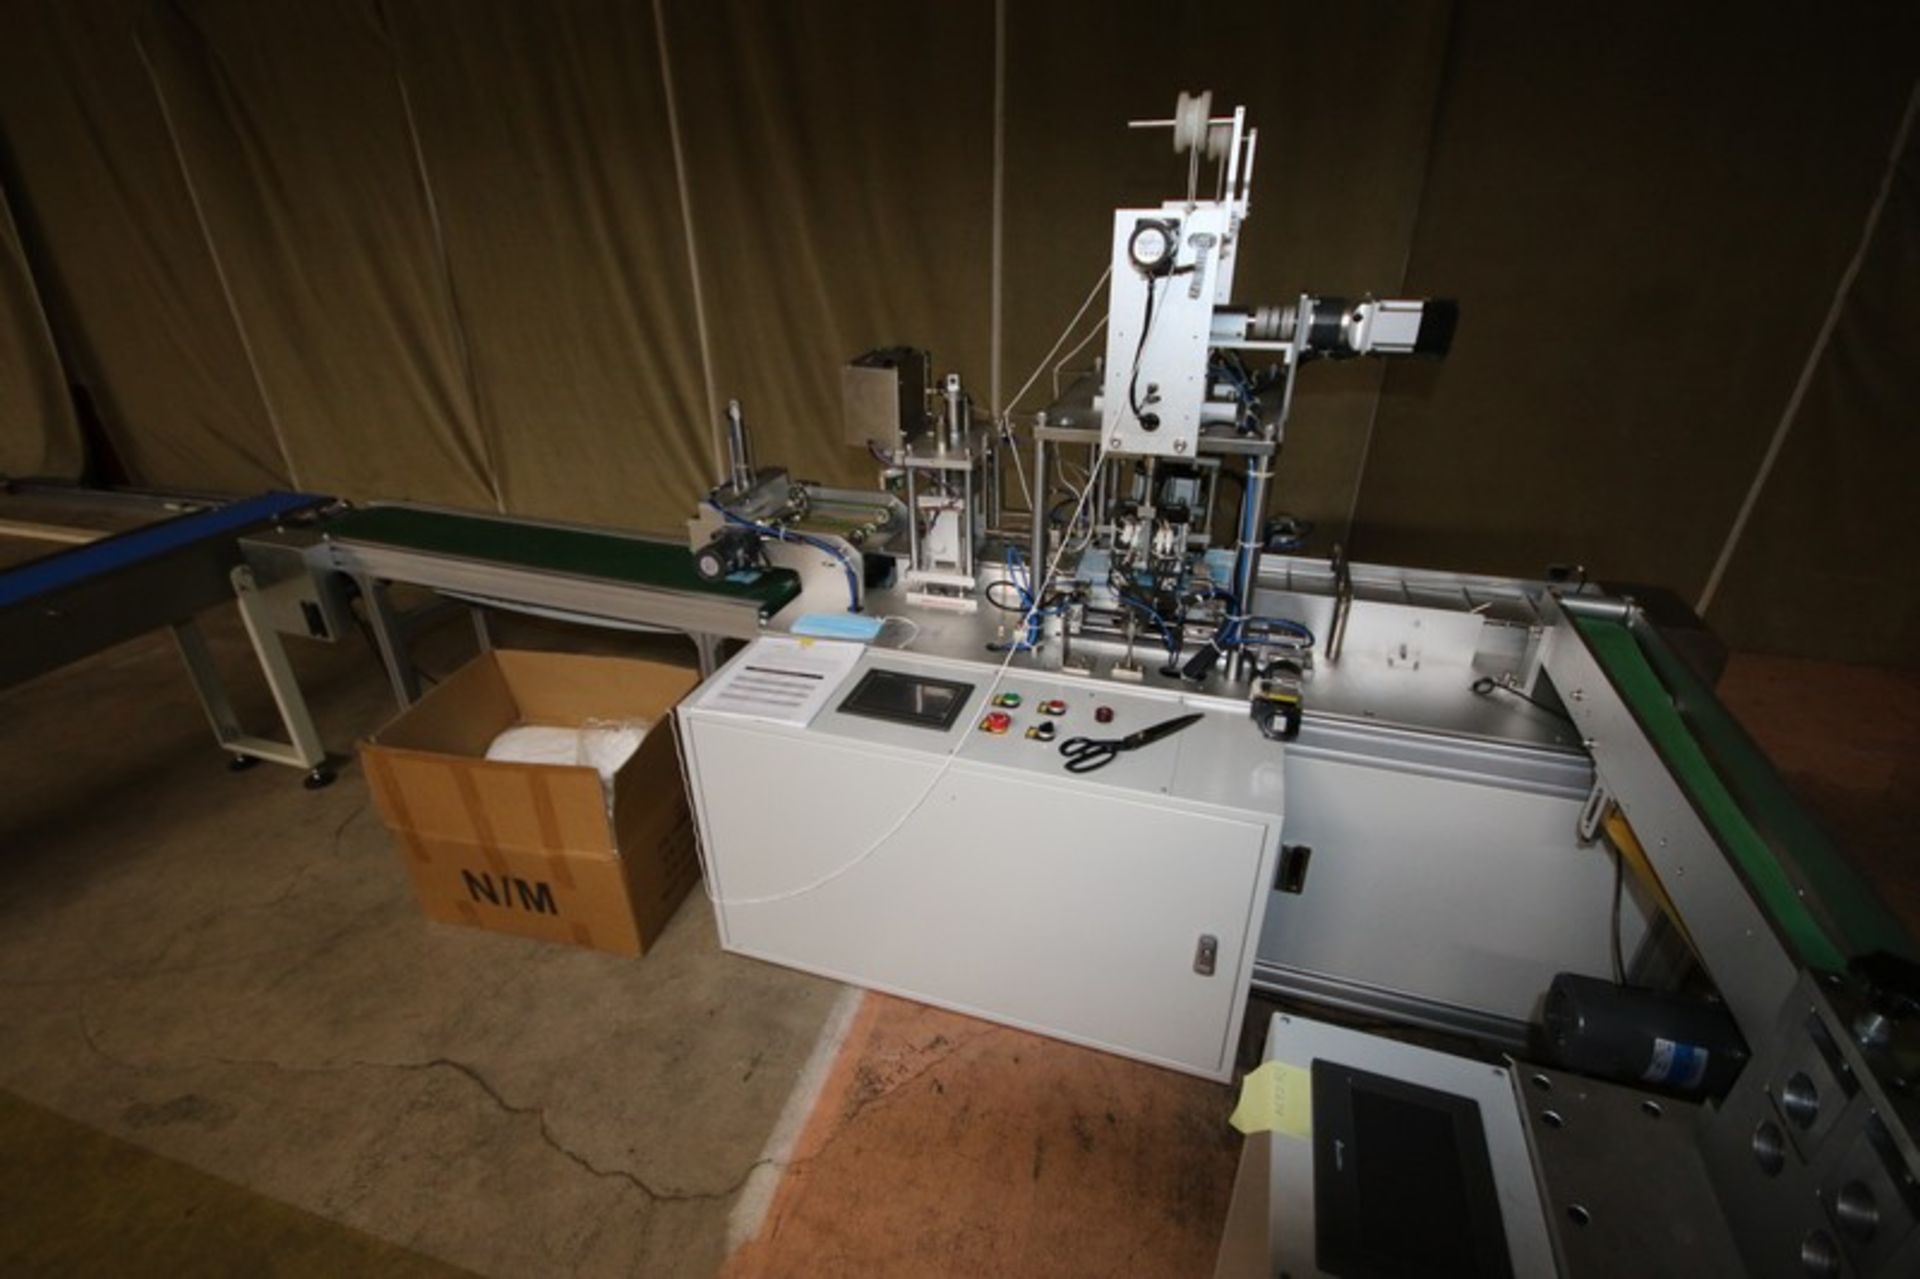 Ultra-Sonic Mask Manufacturing Line, Includes Mask Weave Machine, Nose Bridge and Ear Loop - Image 9 of 13